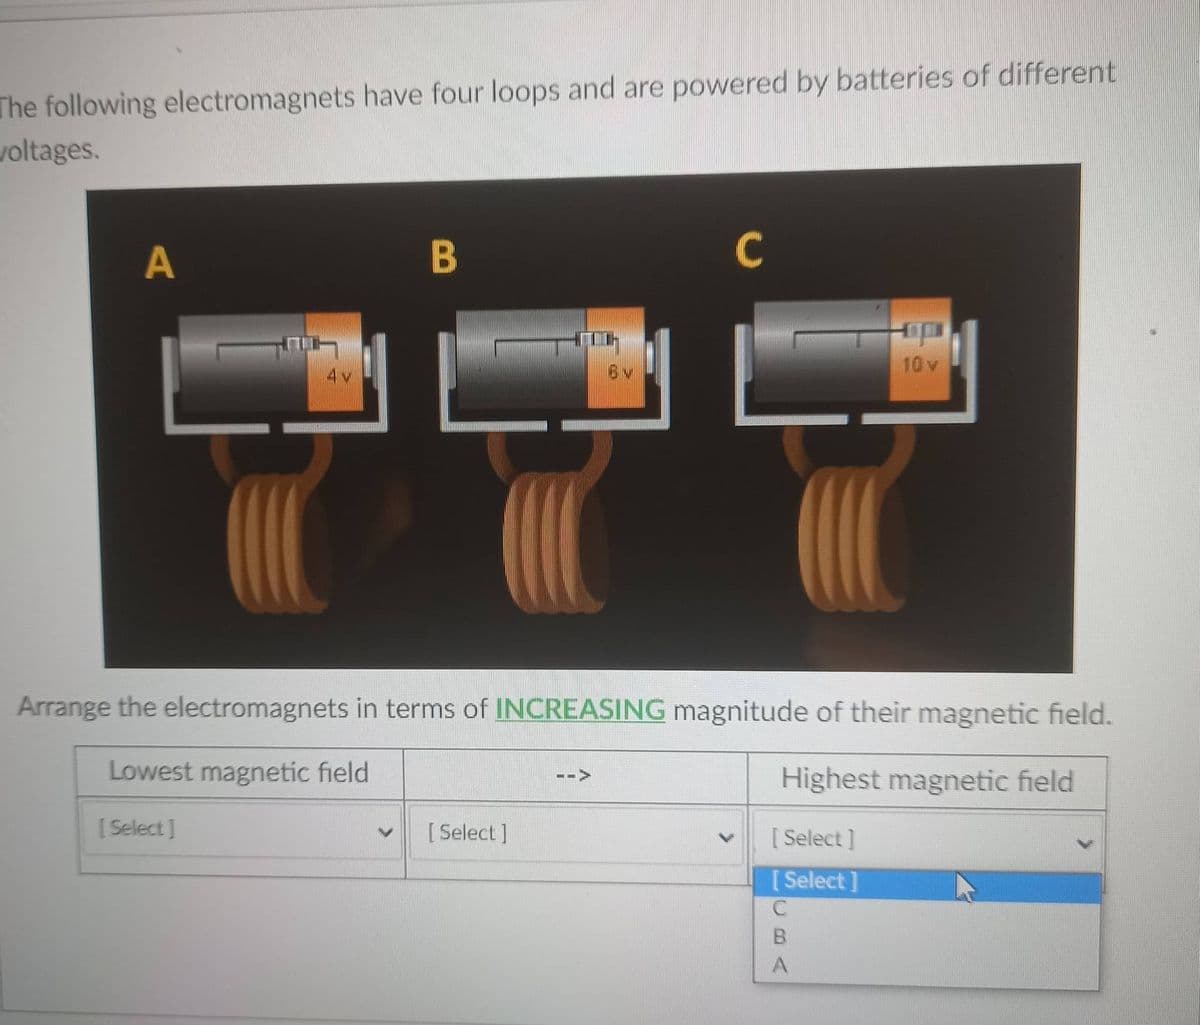 The following electromagnets have four loops and are powered by batteries of different
voltages.
A
B
C
6v
10 v
Arrange the electromagnets in terms of INCREASING magnitude of their magnetic field.
Lowest magnetic field
Highest magnetic field
[Select]
[ Select ]
[ Select ]
[ Select ]
BA
